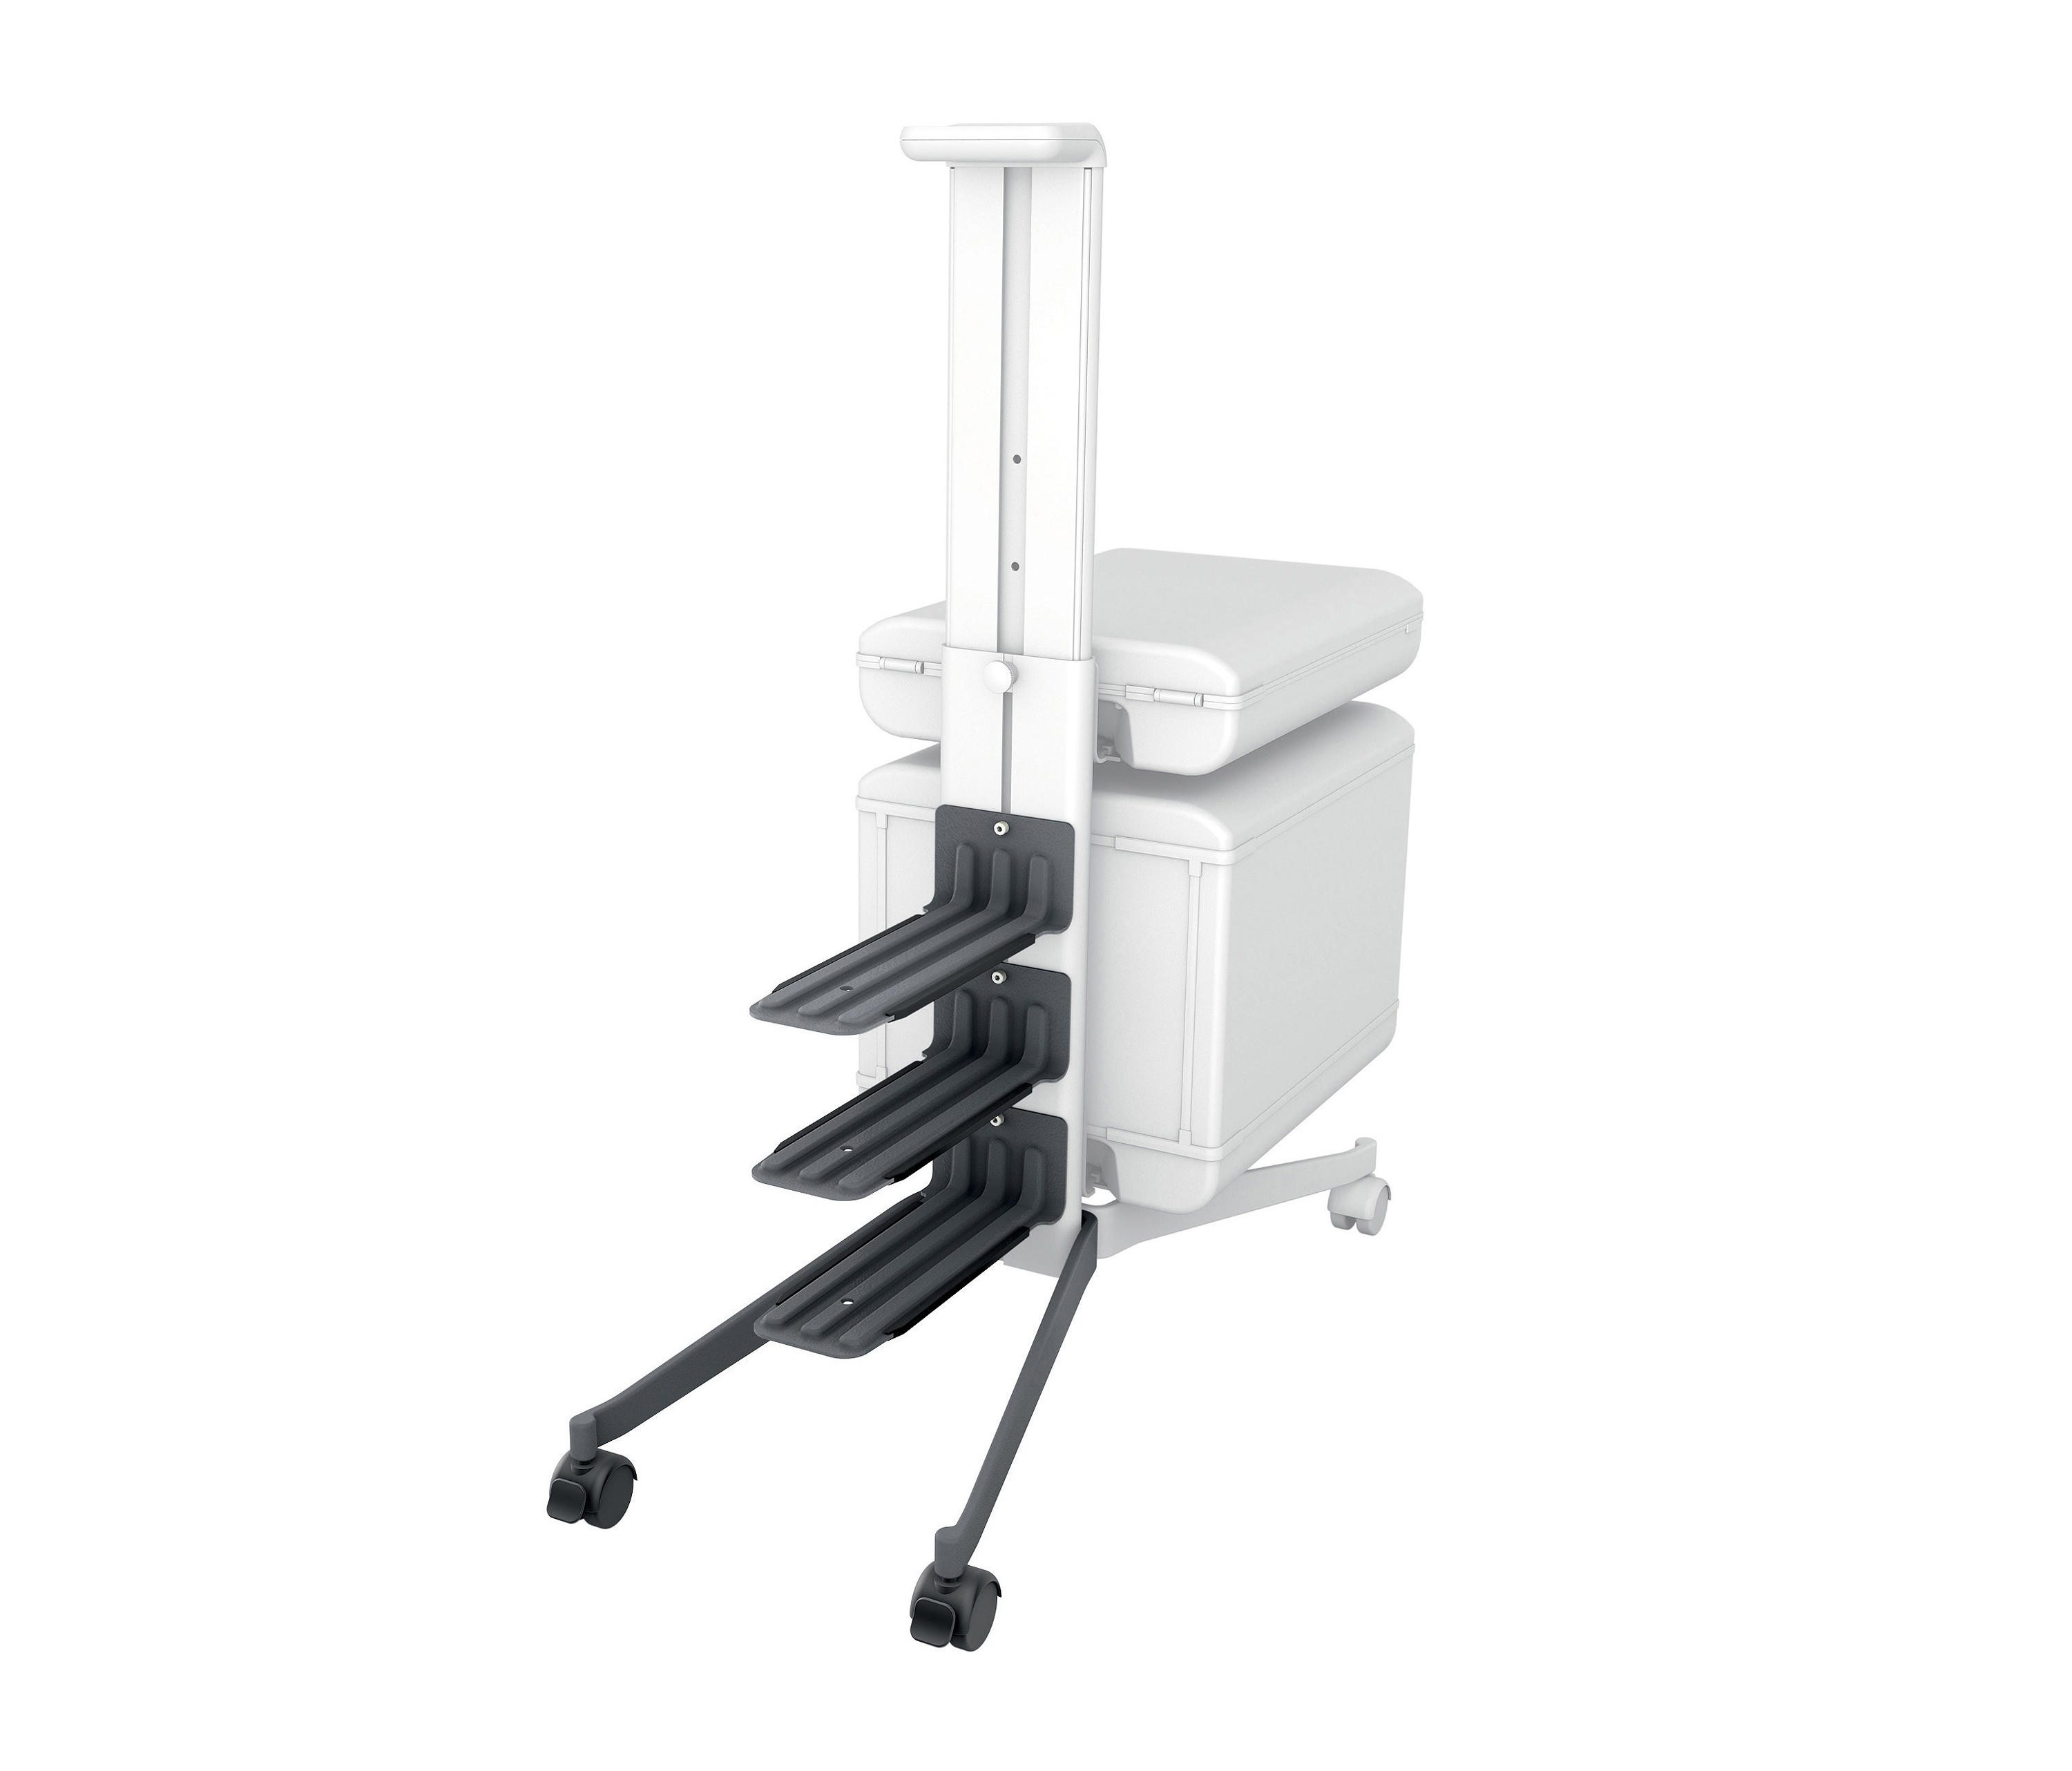 add-on set for Workplace office caddy MI200, to convert the caddy to a  two-sided mobile pedestal